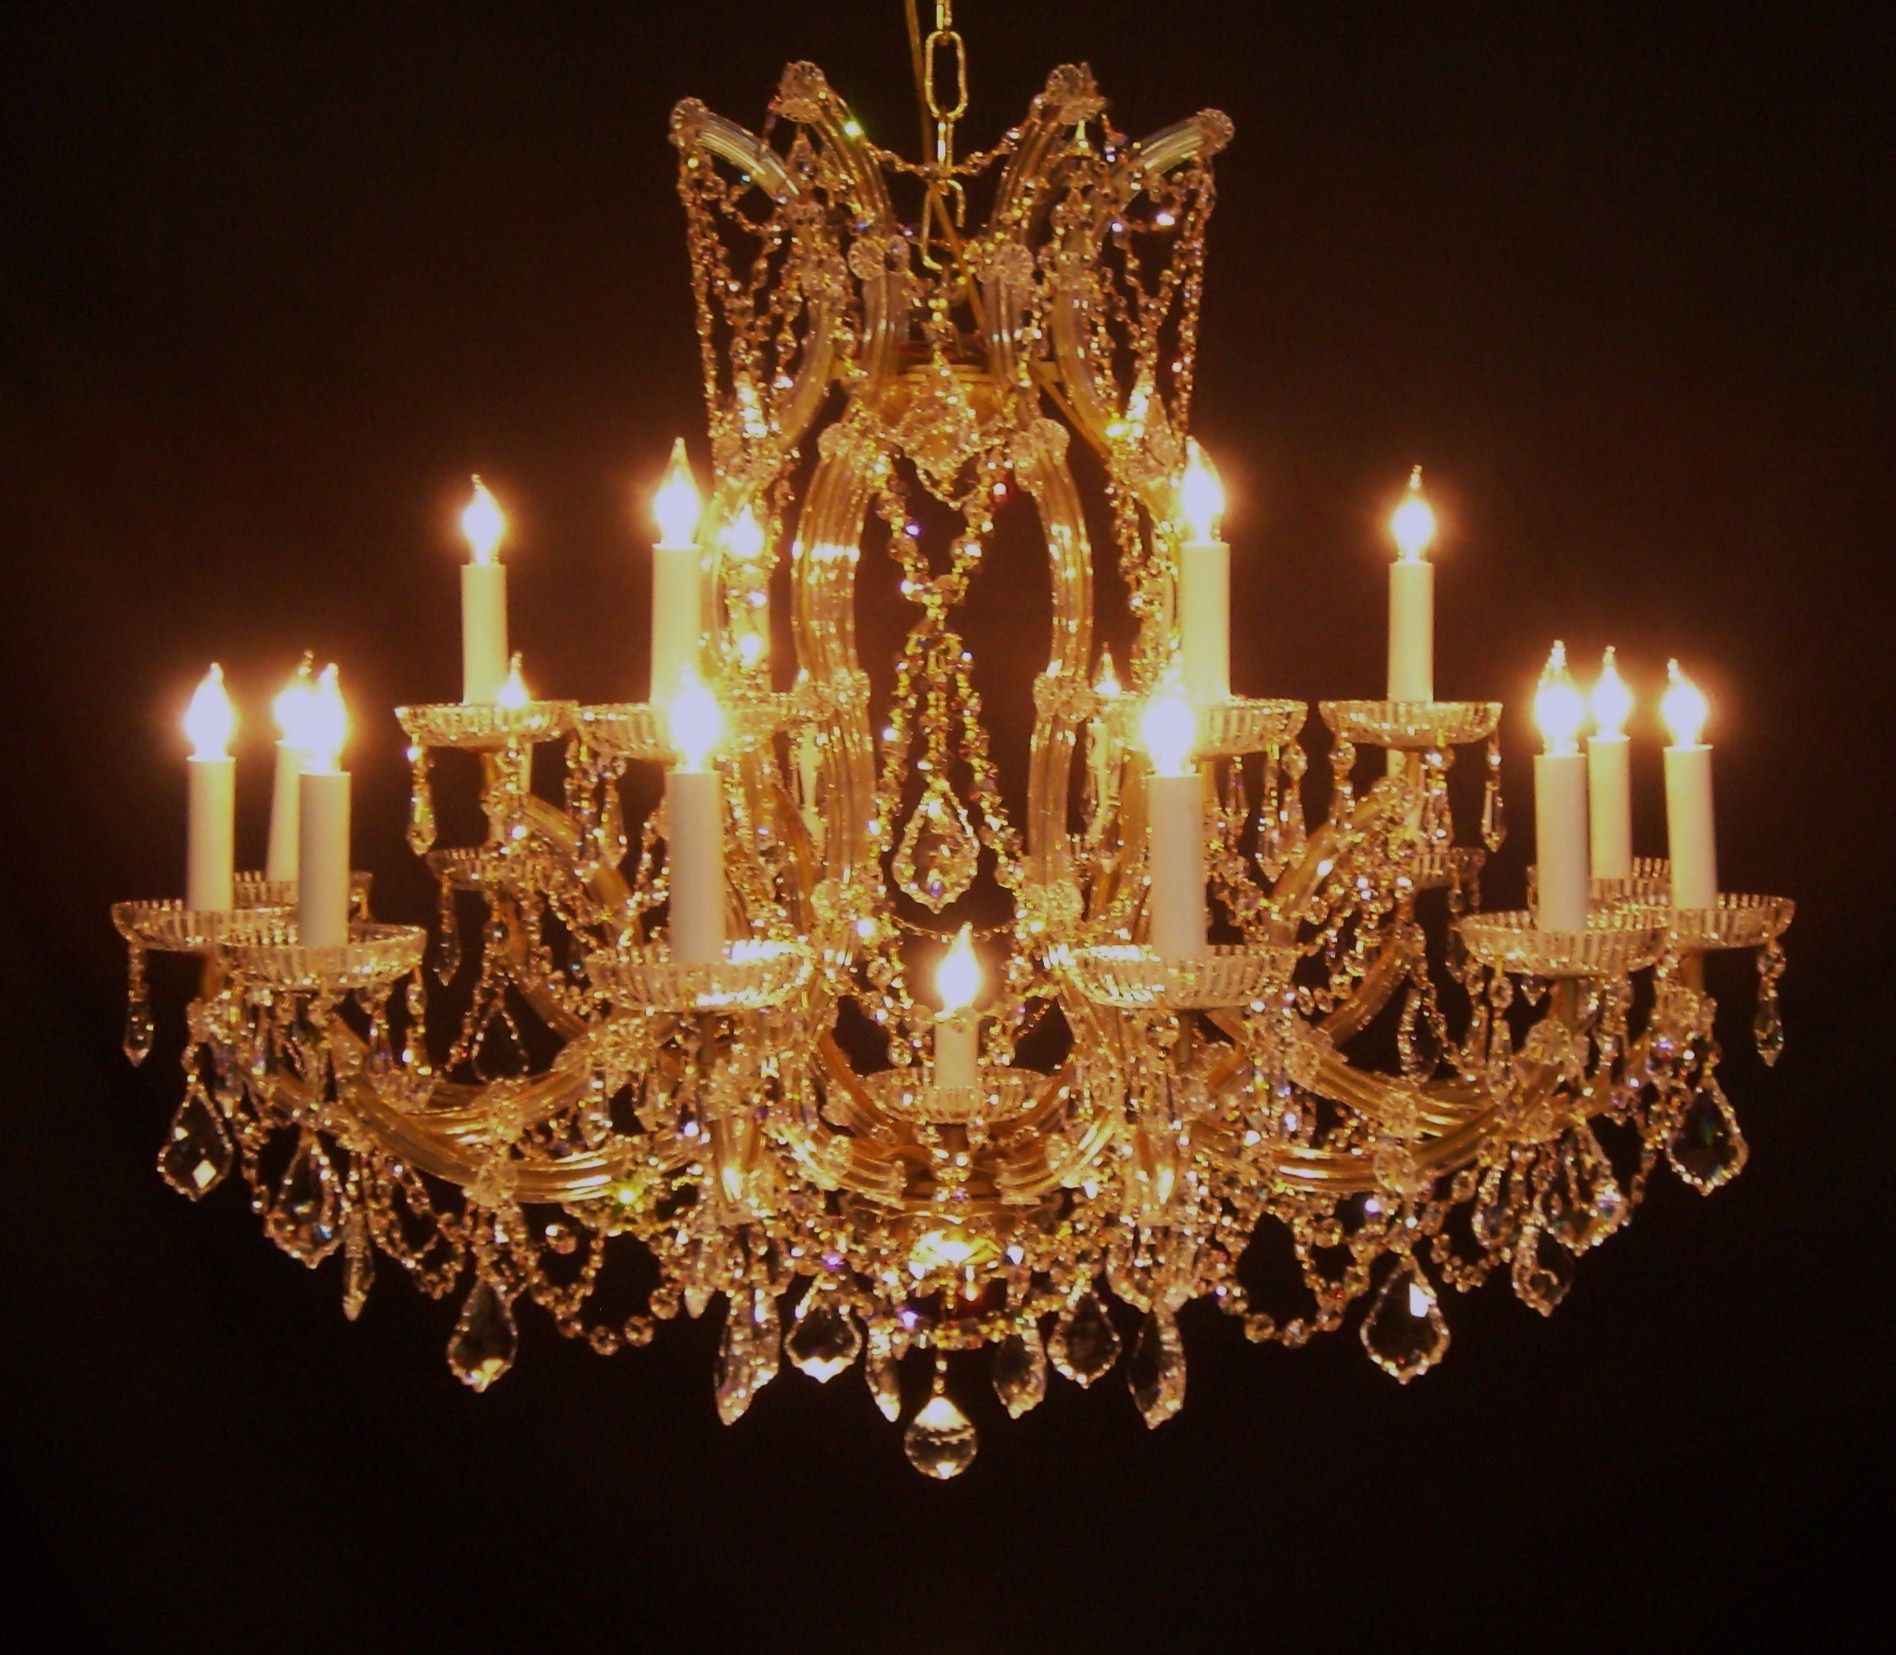 Trendy Chandeliers Design : Fabulous Chinese Chandelier Lighting Crystal Regarding Chinese Chandelier (View 8 of 20)